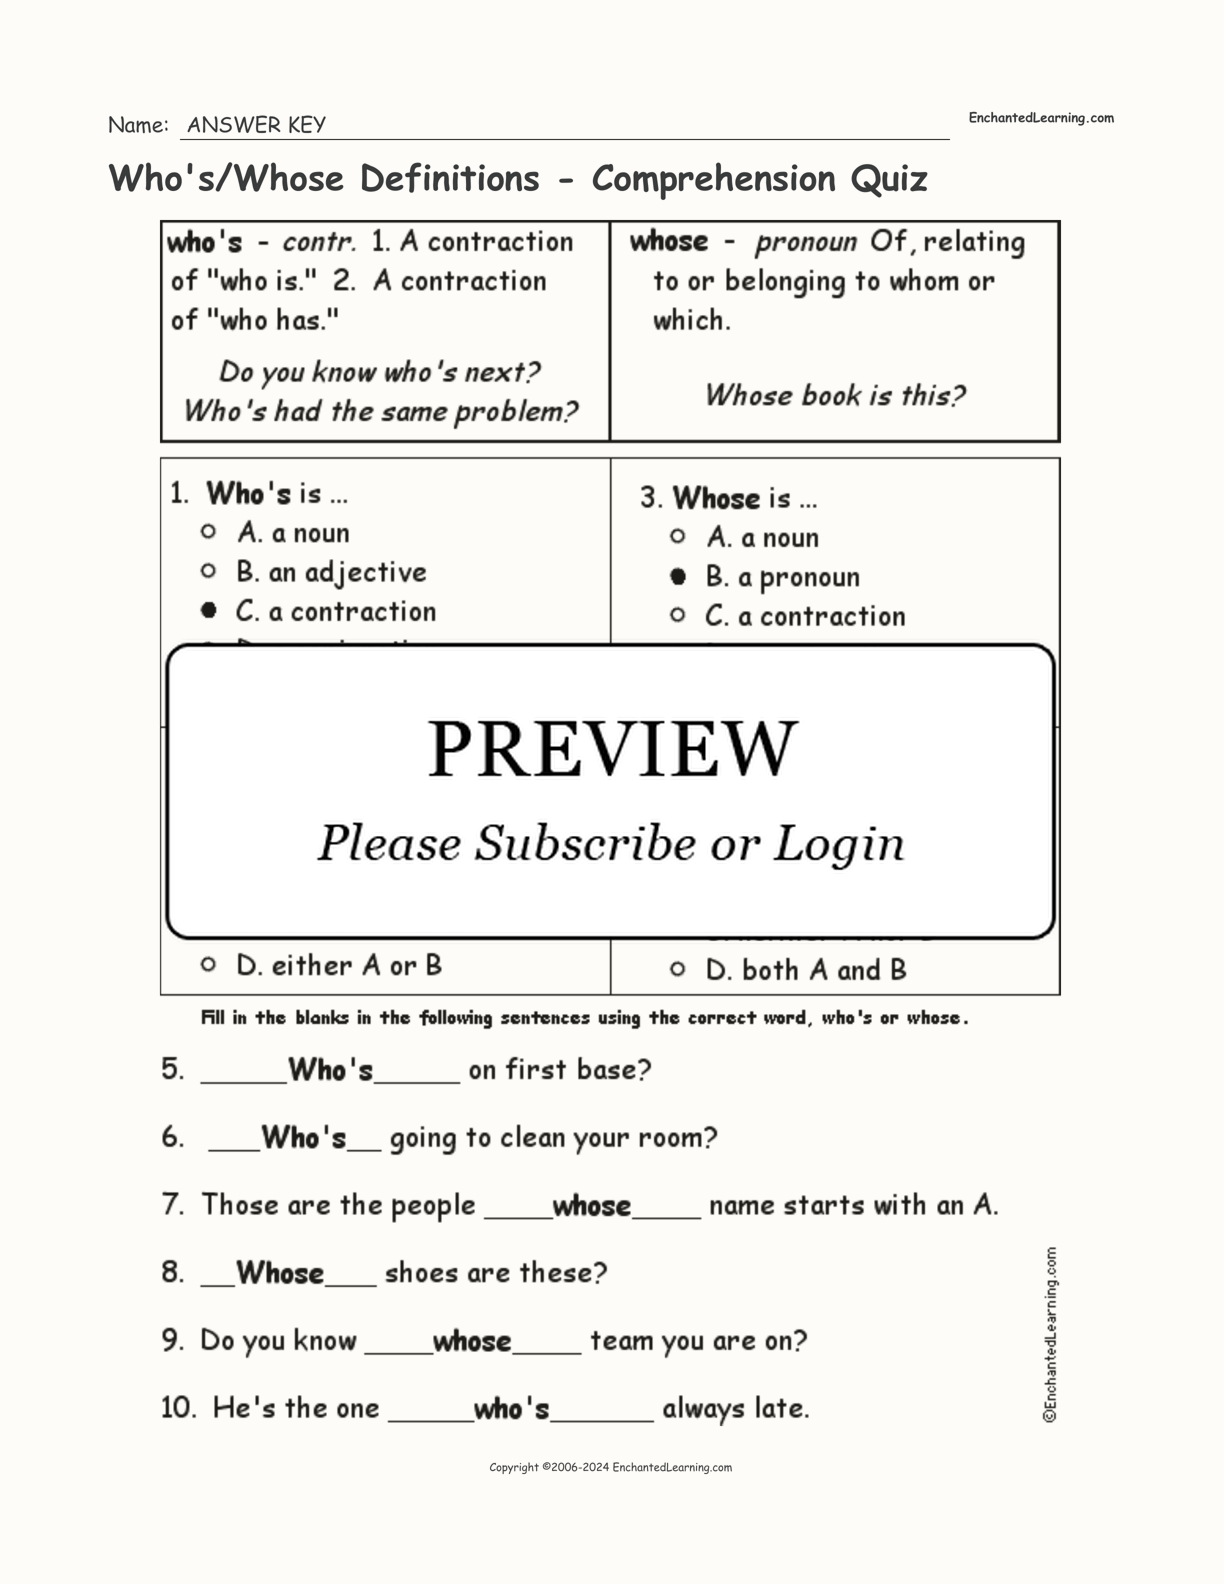 Who's/Whose Definitions - Comprehension Quiz interactive worksheet page 2